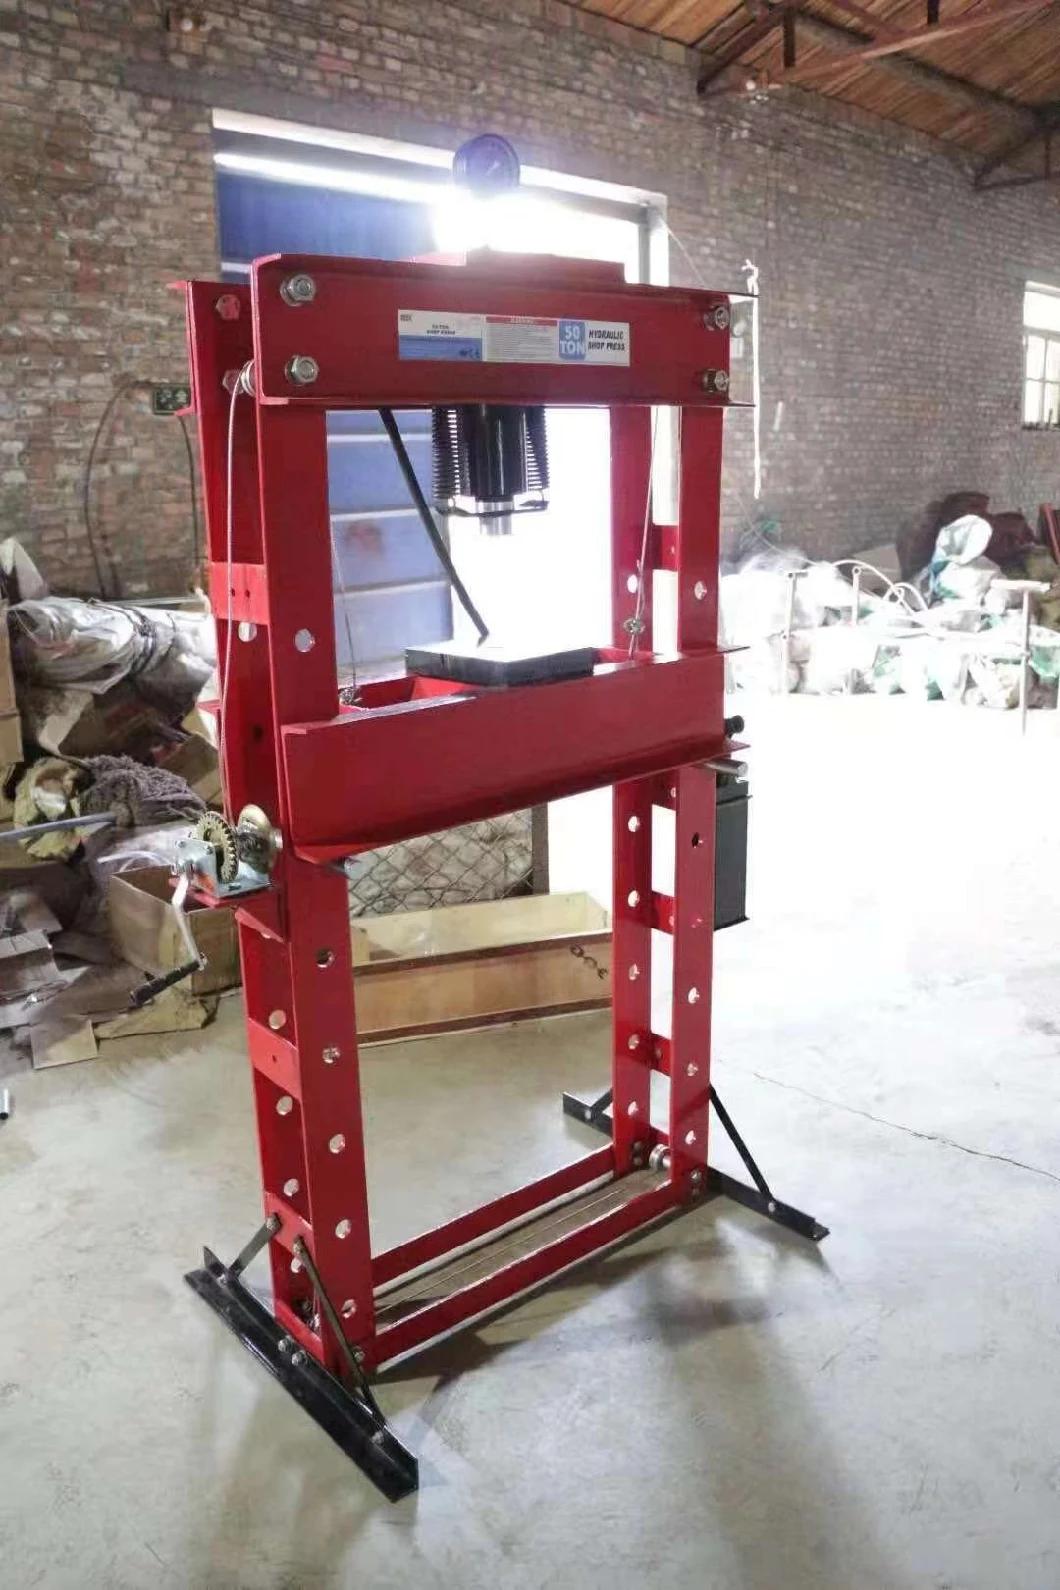 Garage Repaired Vehicle Equipment 40t Hydraulic Shop Press with Car Bottle Jack